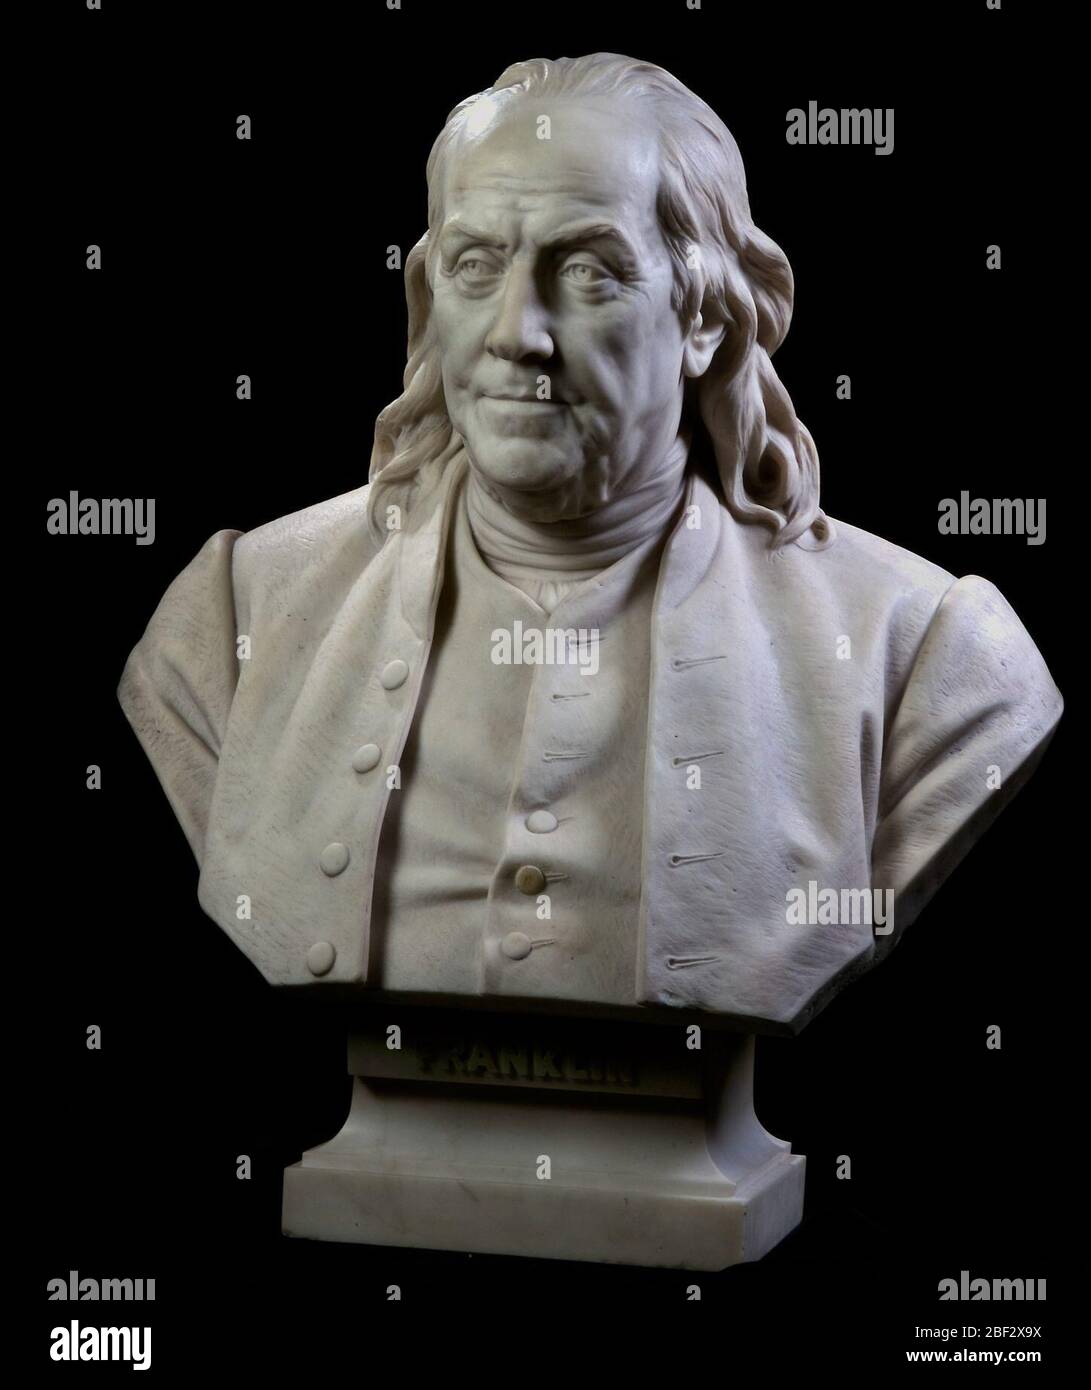 Benjamin Franklin. Between 1904 and 1906, the director of the American ...